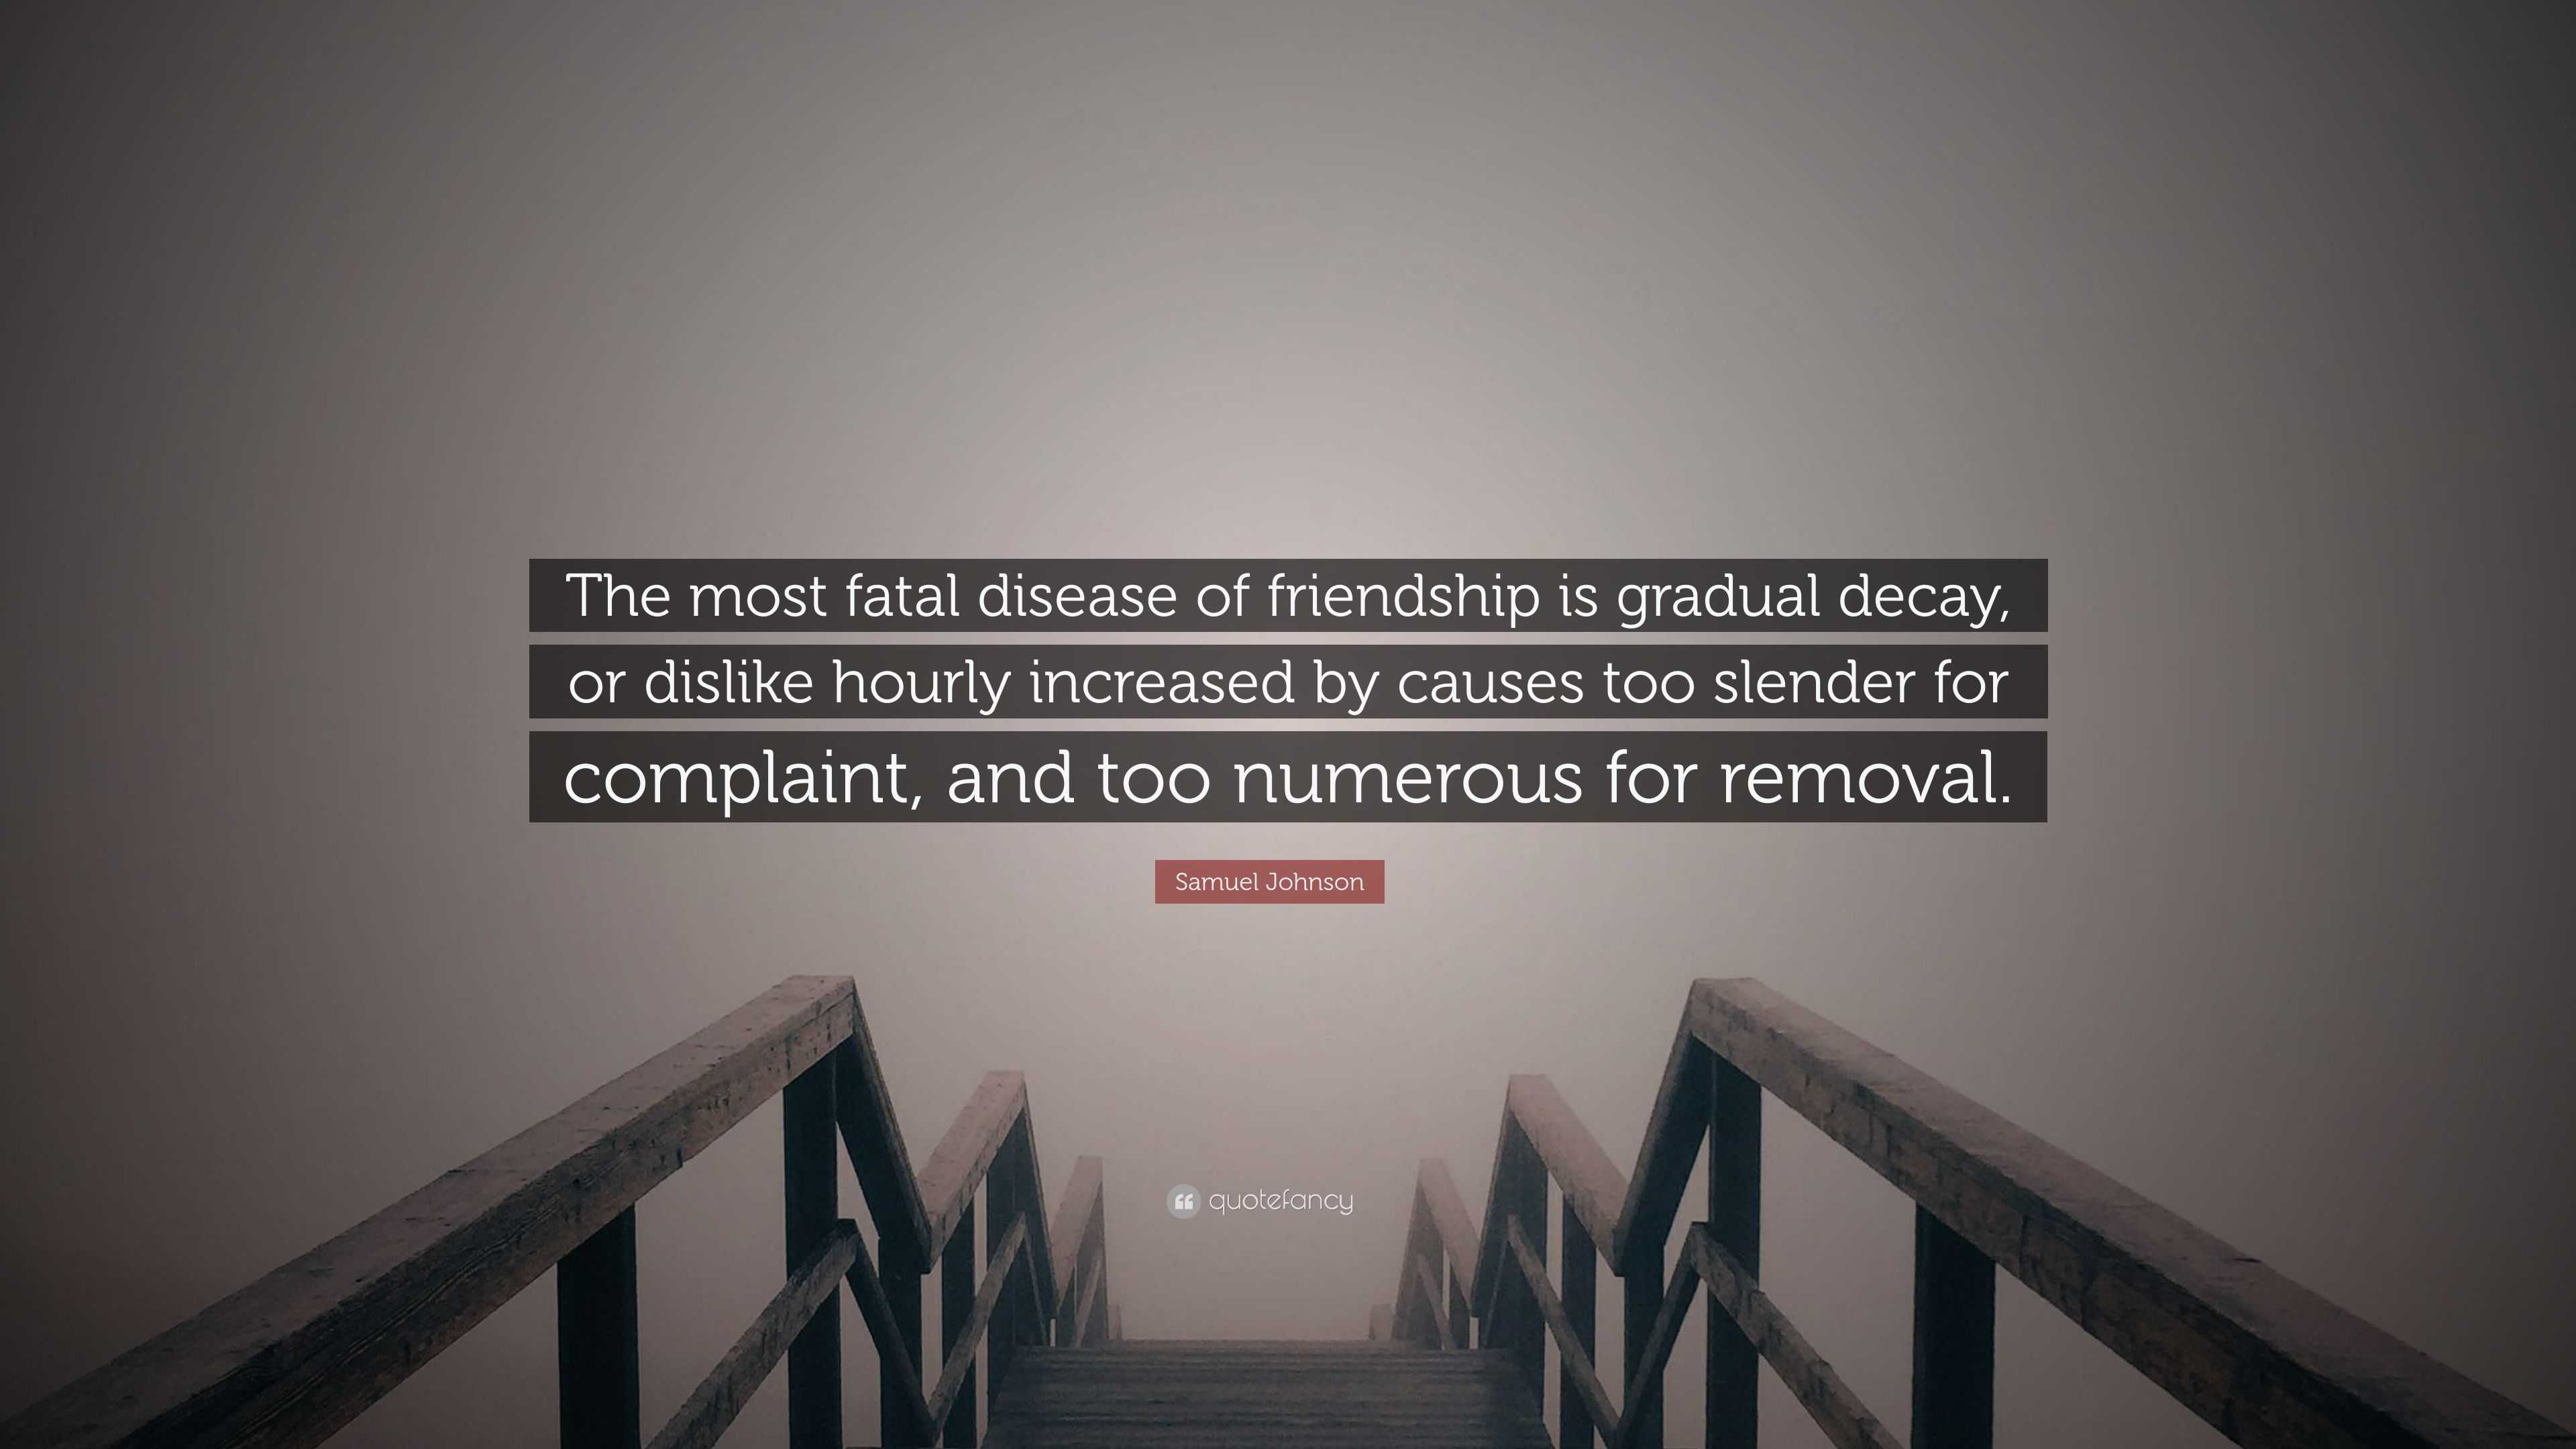 the decay of friendship by samuel johnson